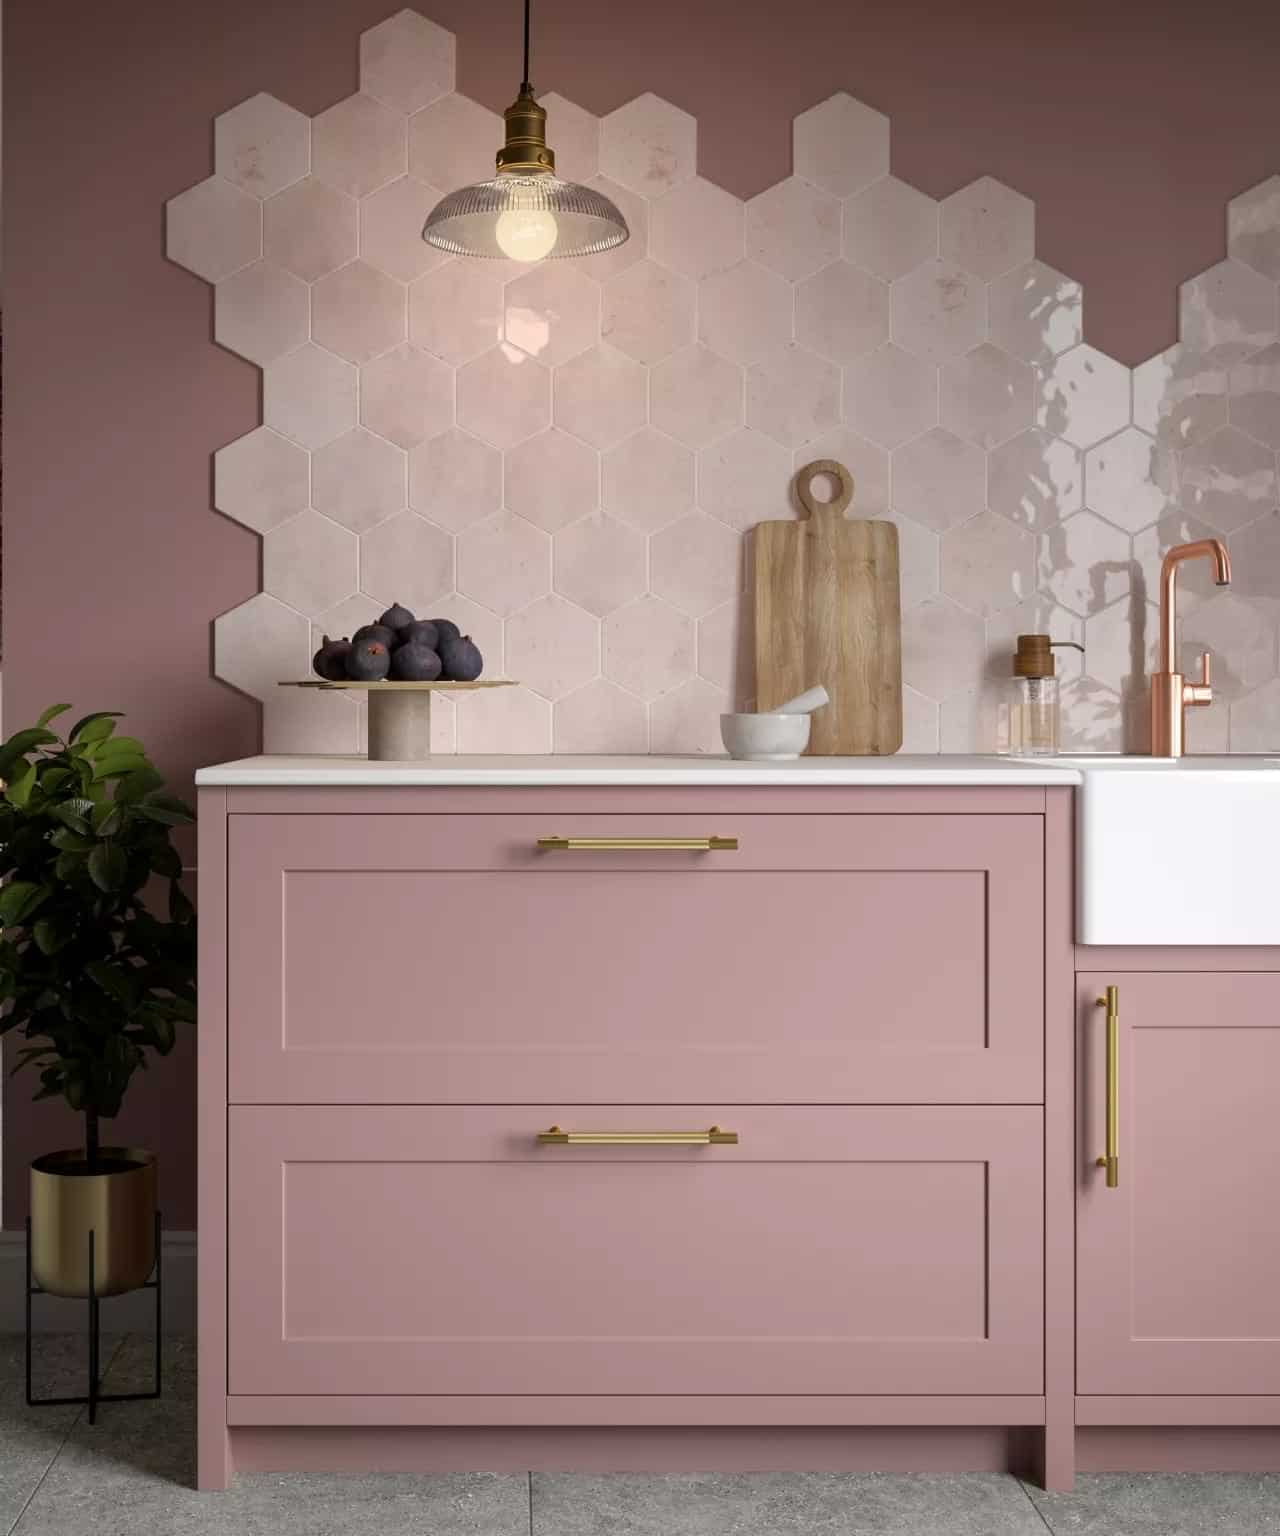 Pink kitchen with hexagonal wall tiles